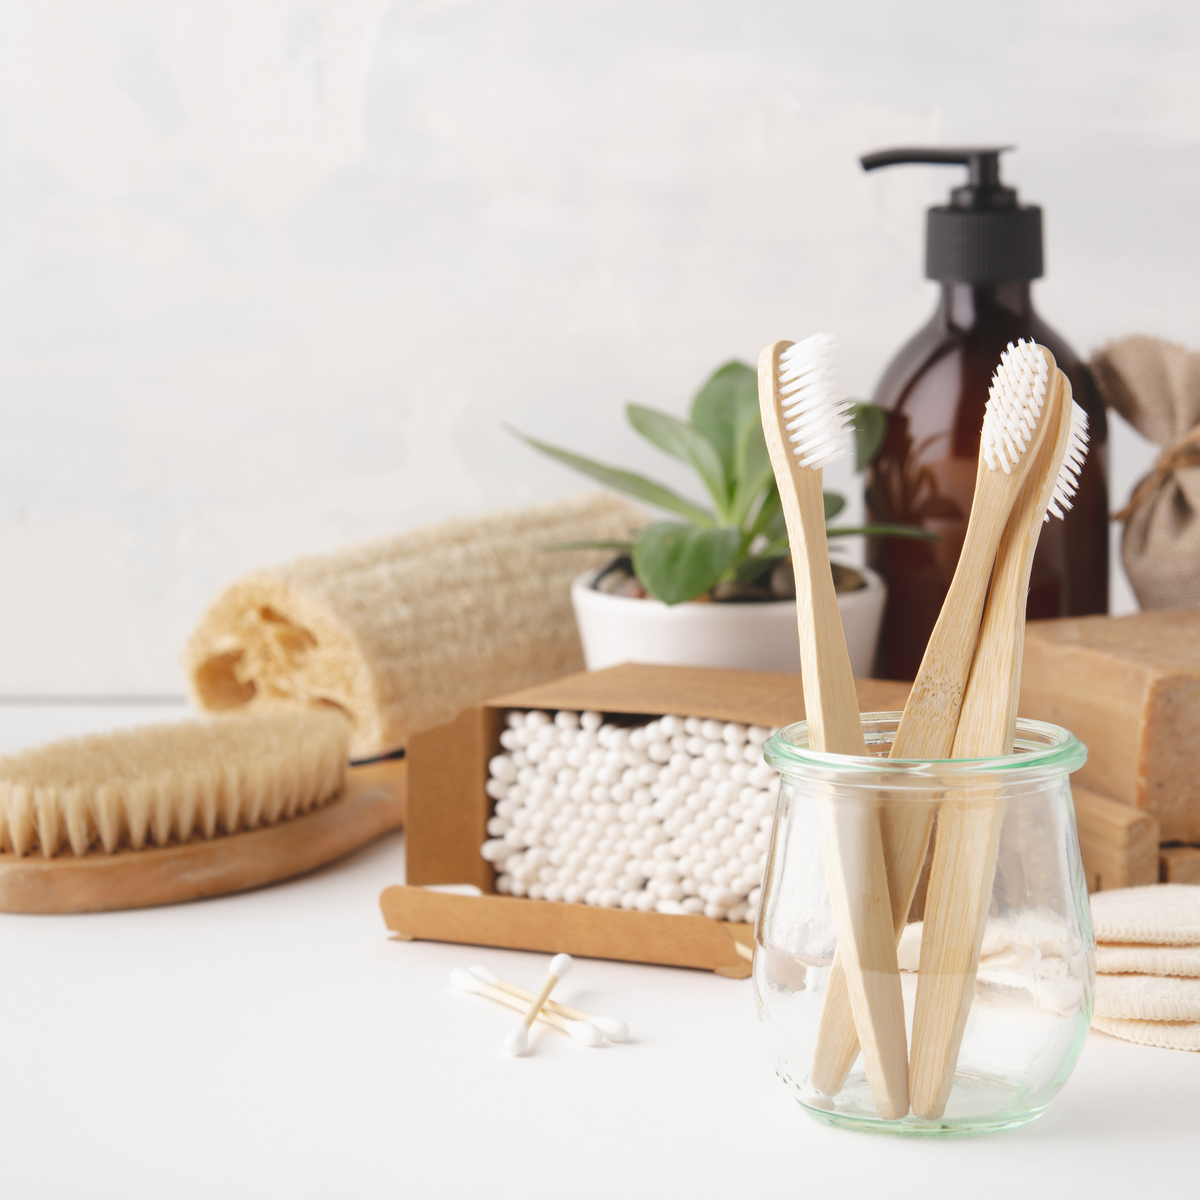 3 bamboo sustainable toothbrushes standing up in a jar, with eco-friendly cotton swabs and hairbrush in the back ground.  A small plant is next to a loofah sponge